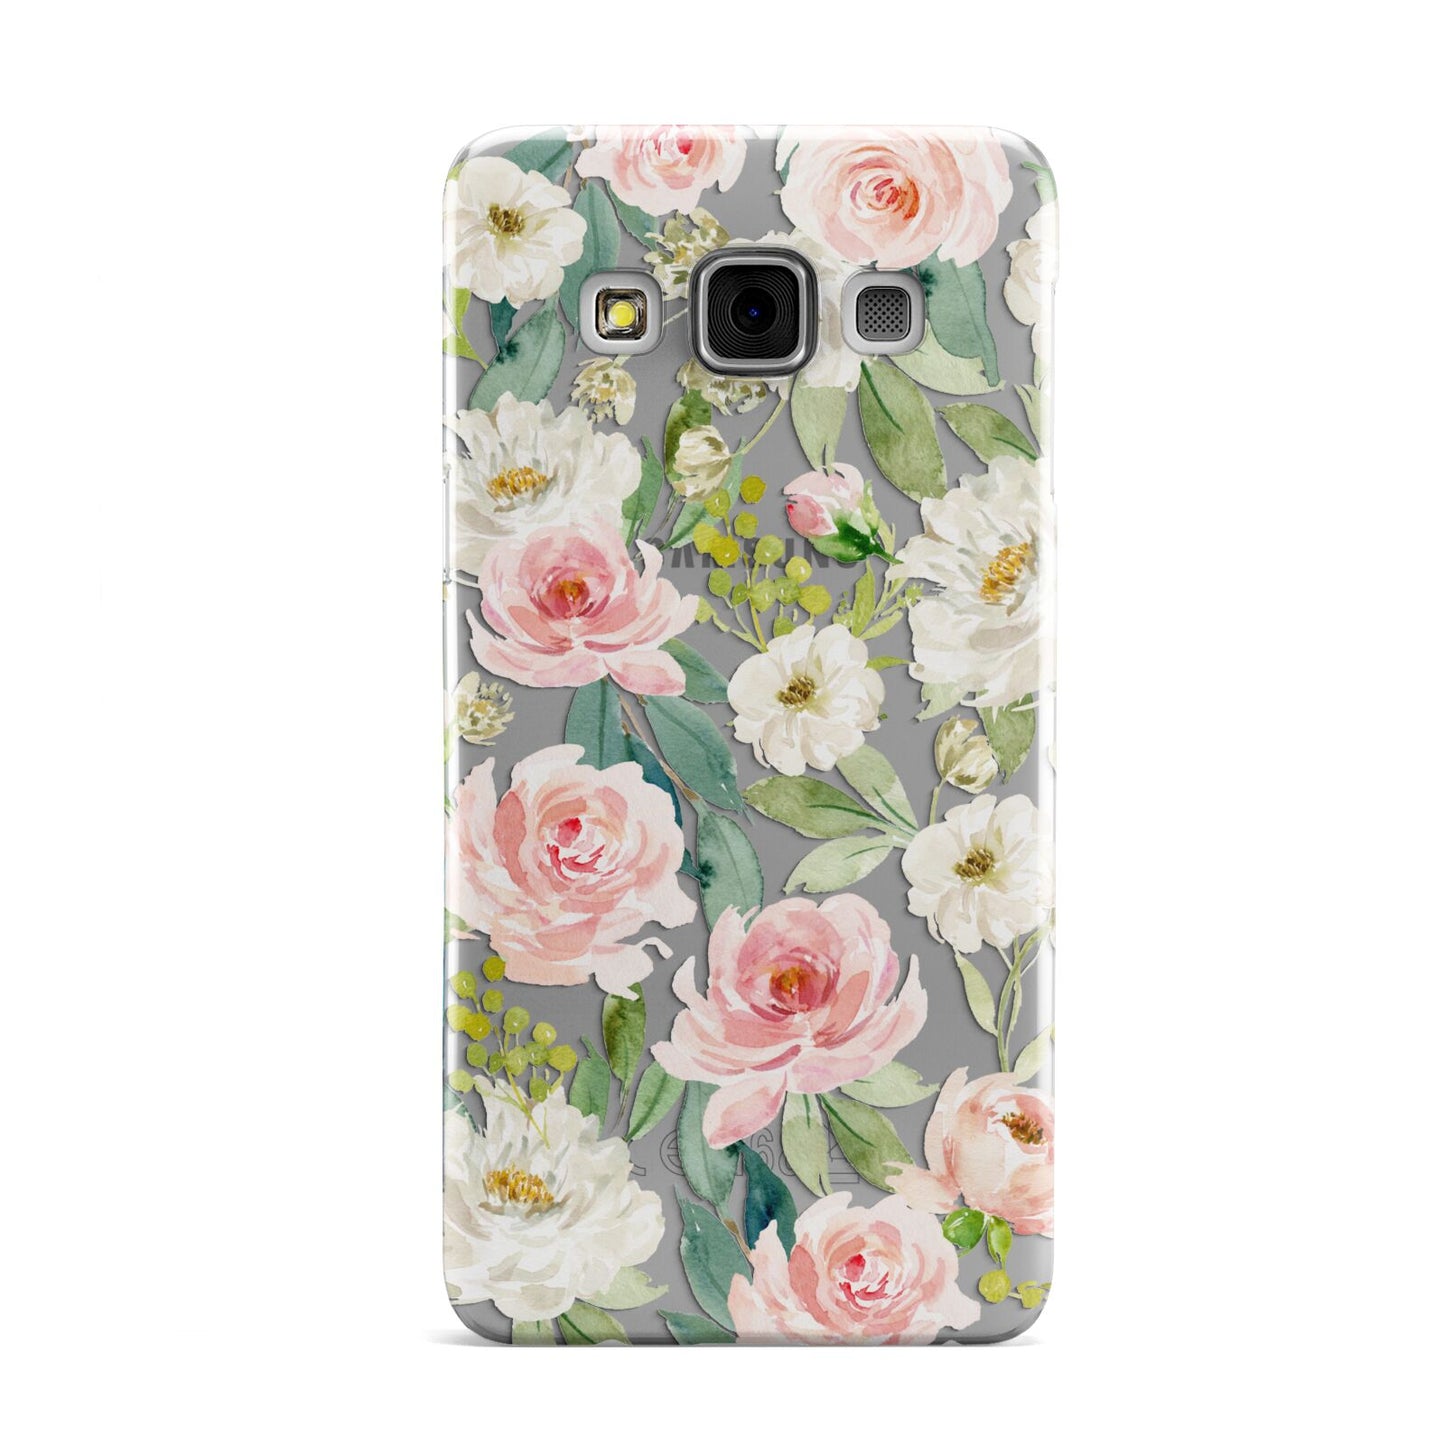 Watercolour Peonies Roses and Foliage Samsung Galaxy A3 Case